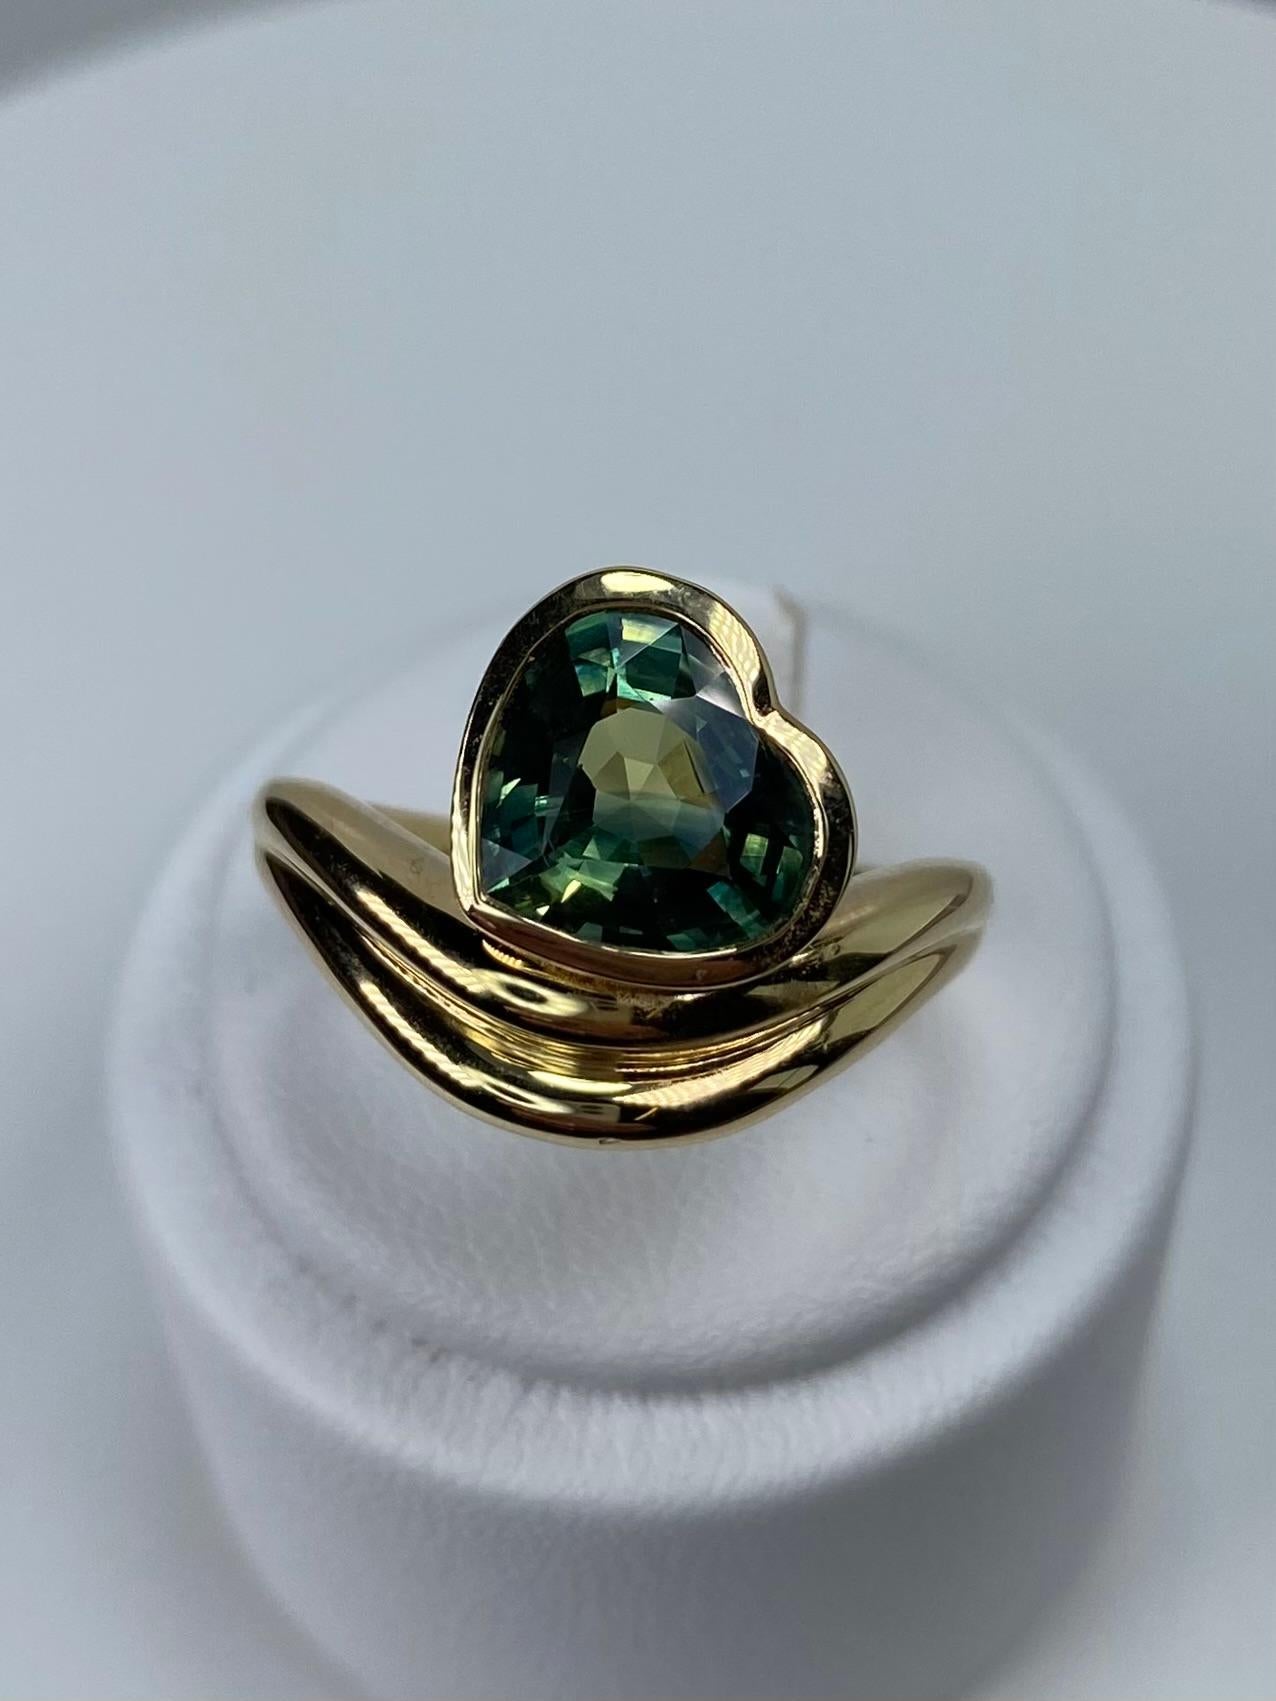 Introducing an exquisite masterpiece from The Sapphire Merchant: this 18k yellow gold and 3.00ct heart-shaped teal sapphire ring. This captivating ring boasts a unique rub-over setting that elegantly encases the enchanting greenish teal sapphire,